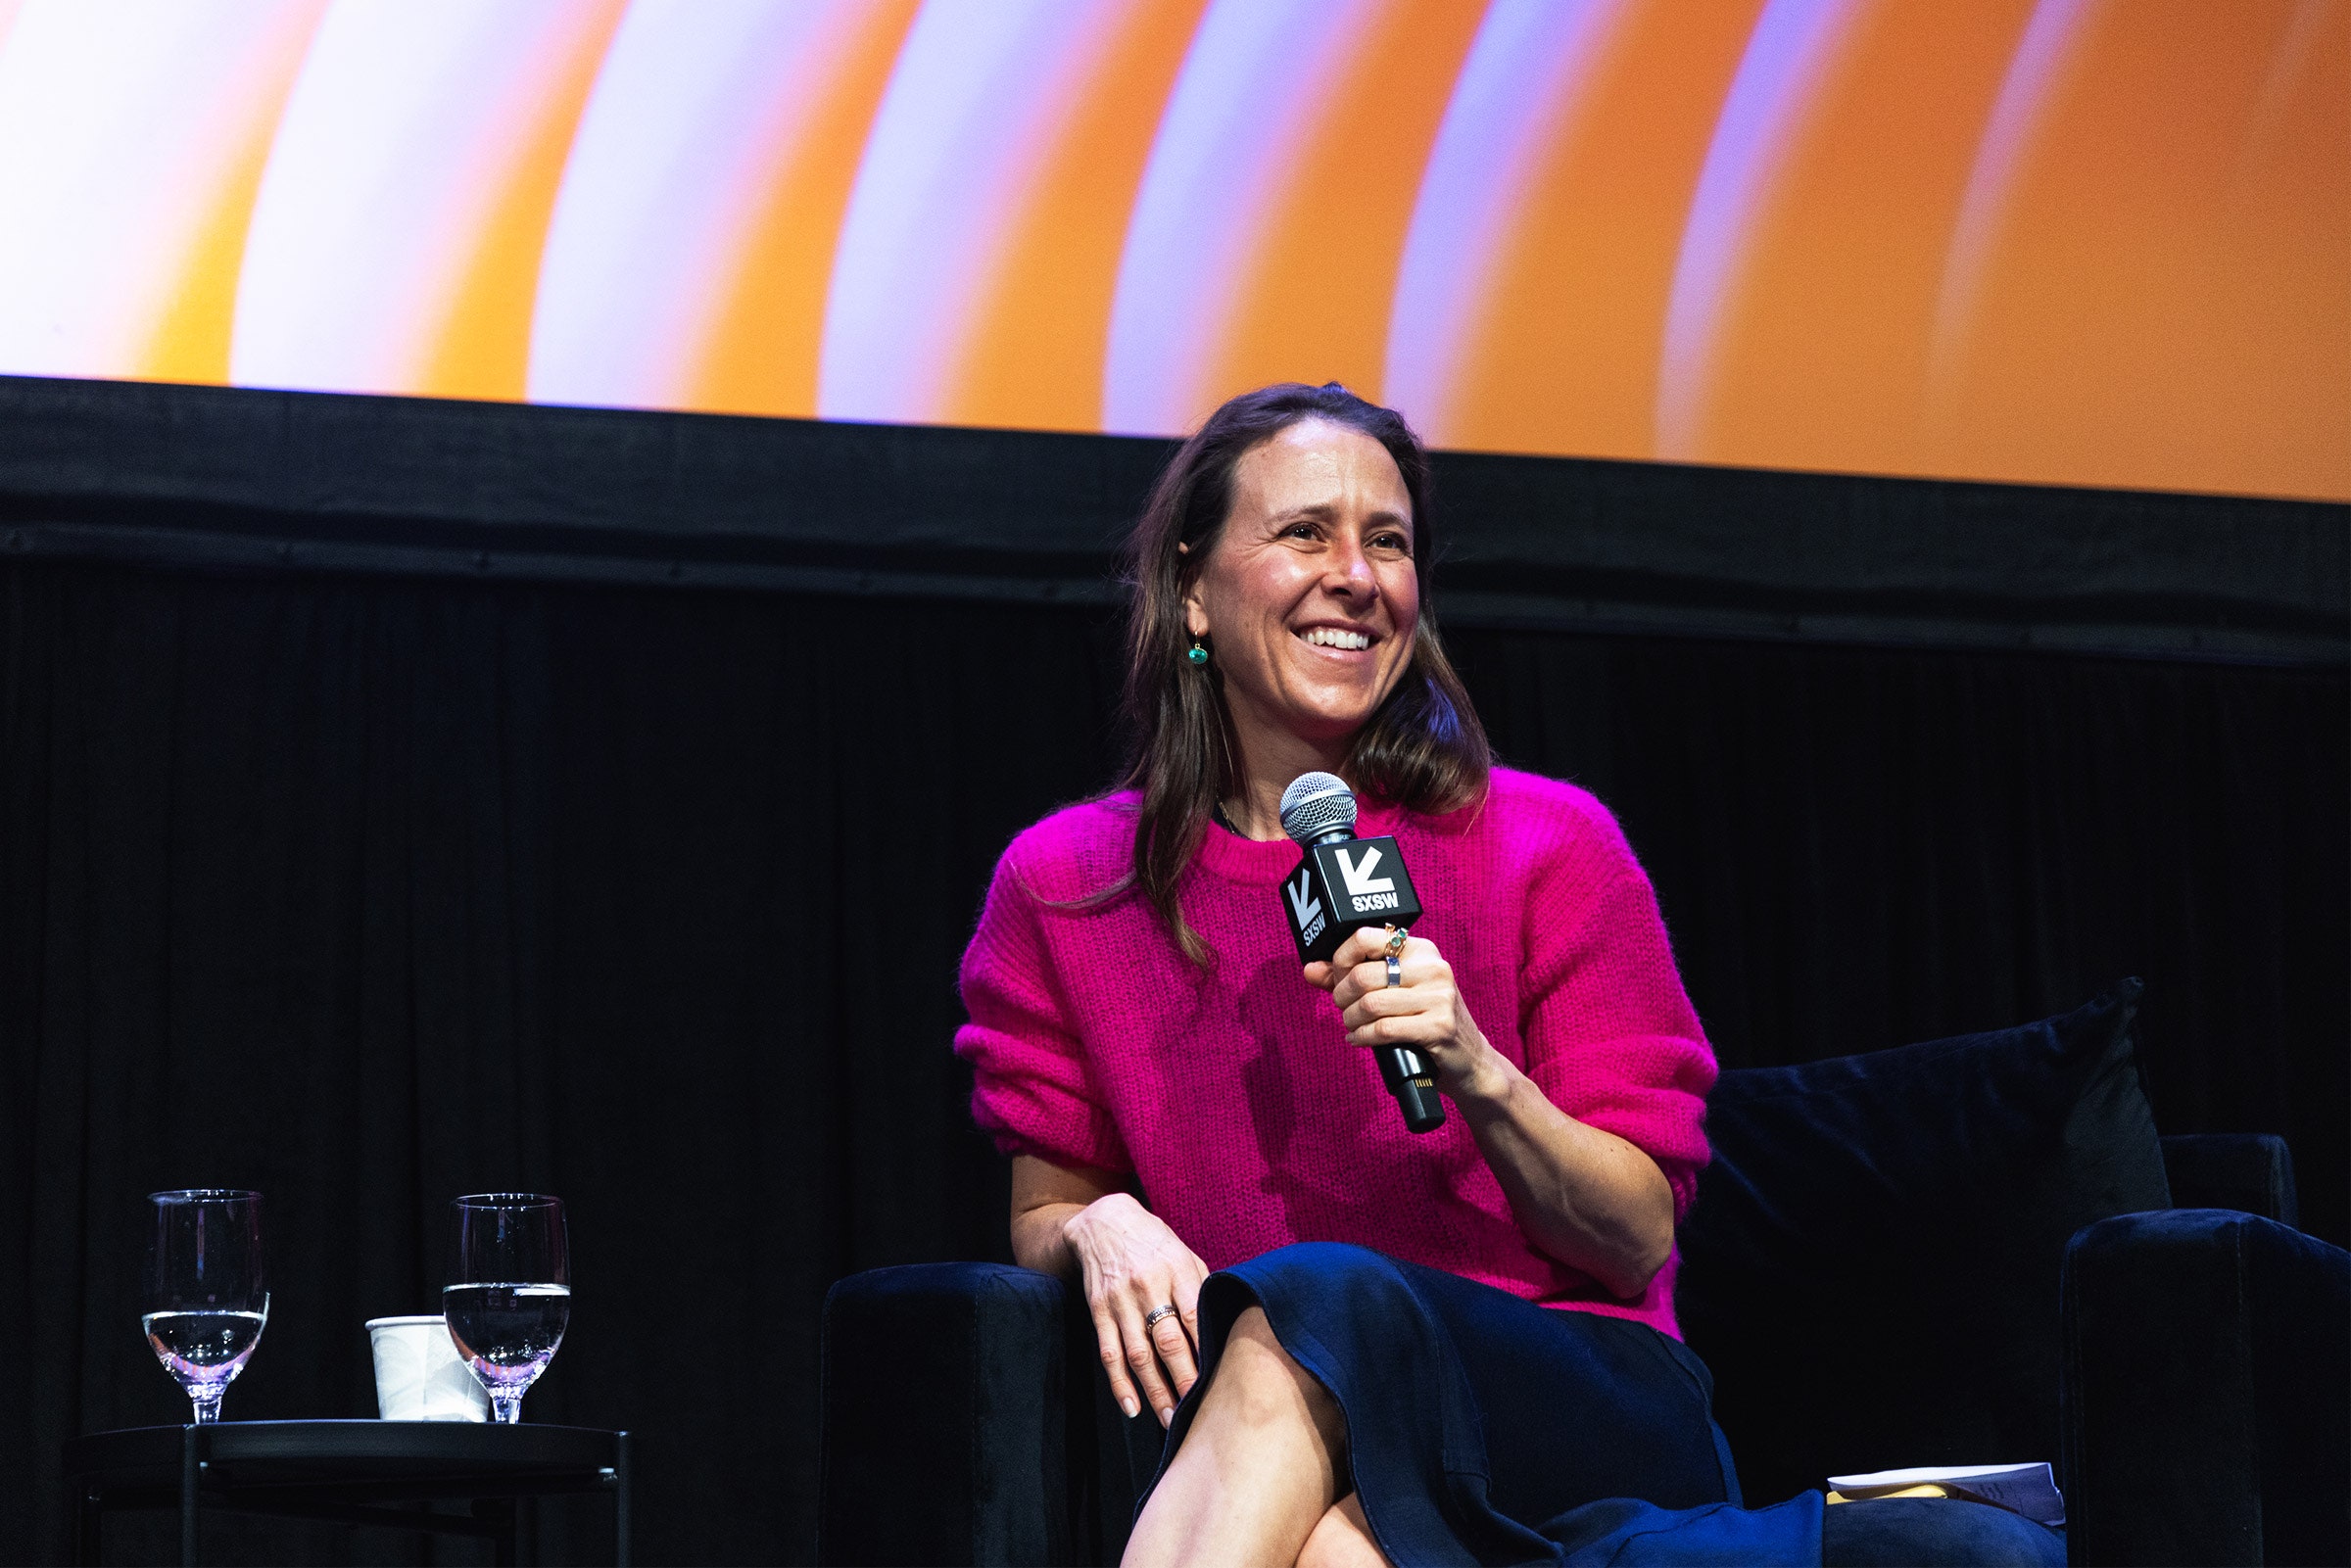 Fighting Back: 23andMe Founder’s Optimism Amidst Controversy